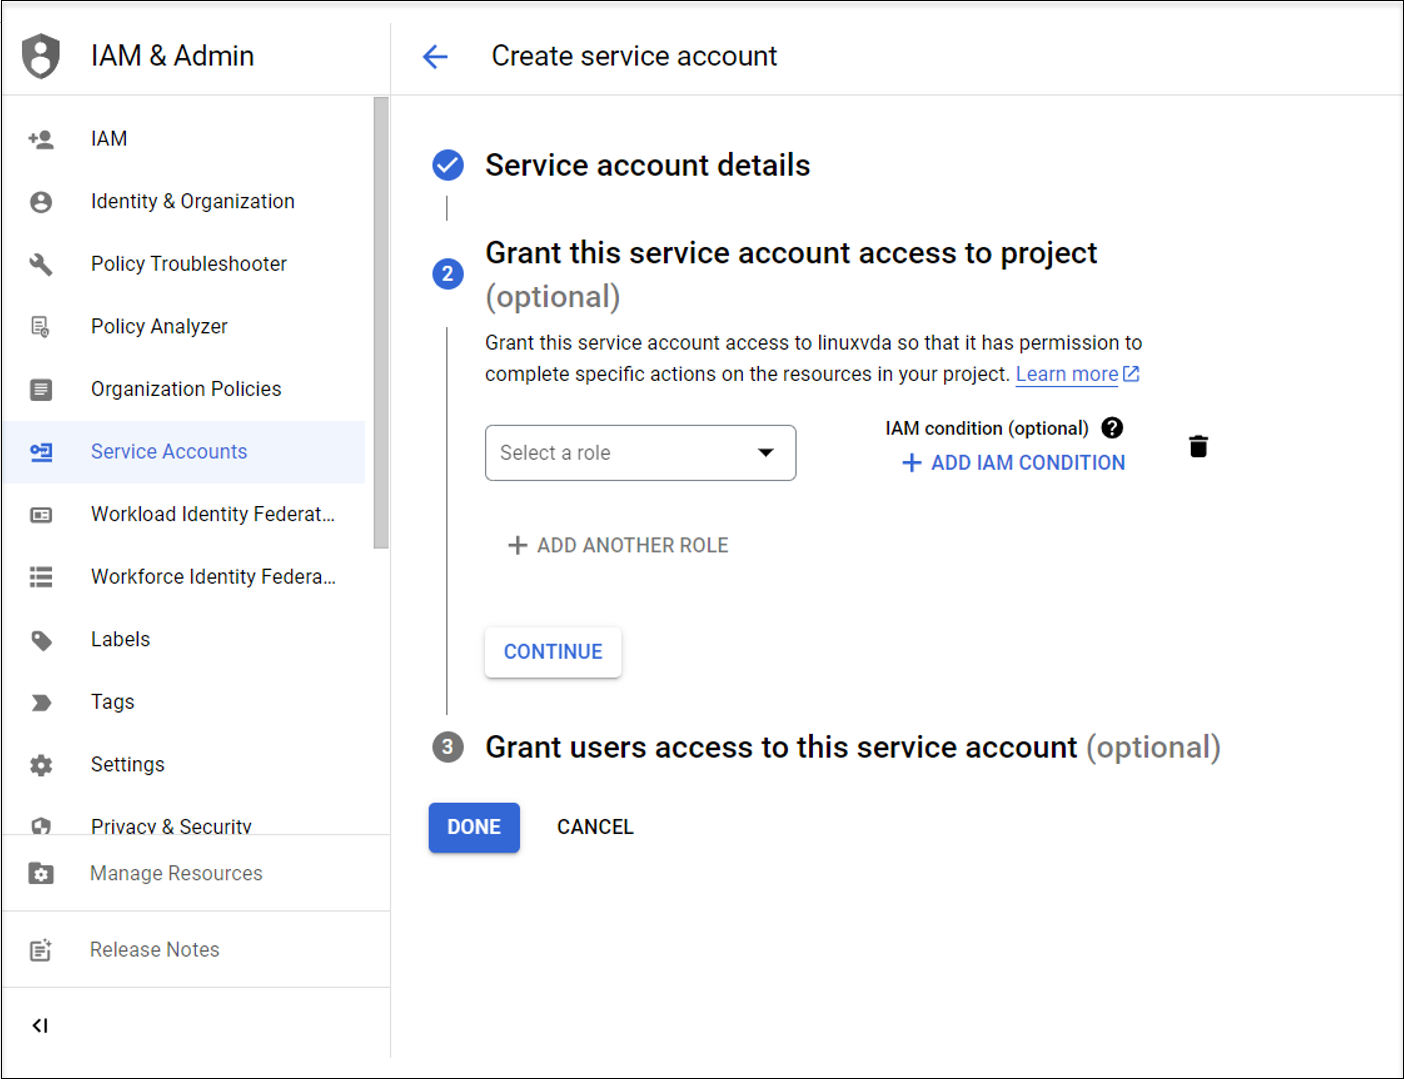 Done with creating a GCP service account